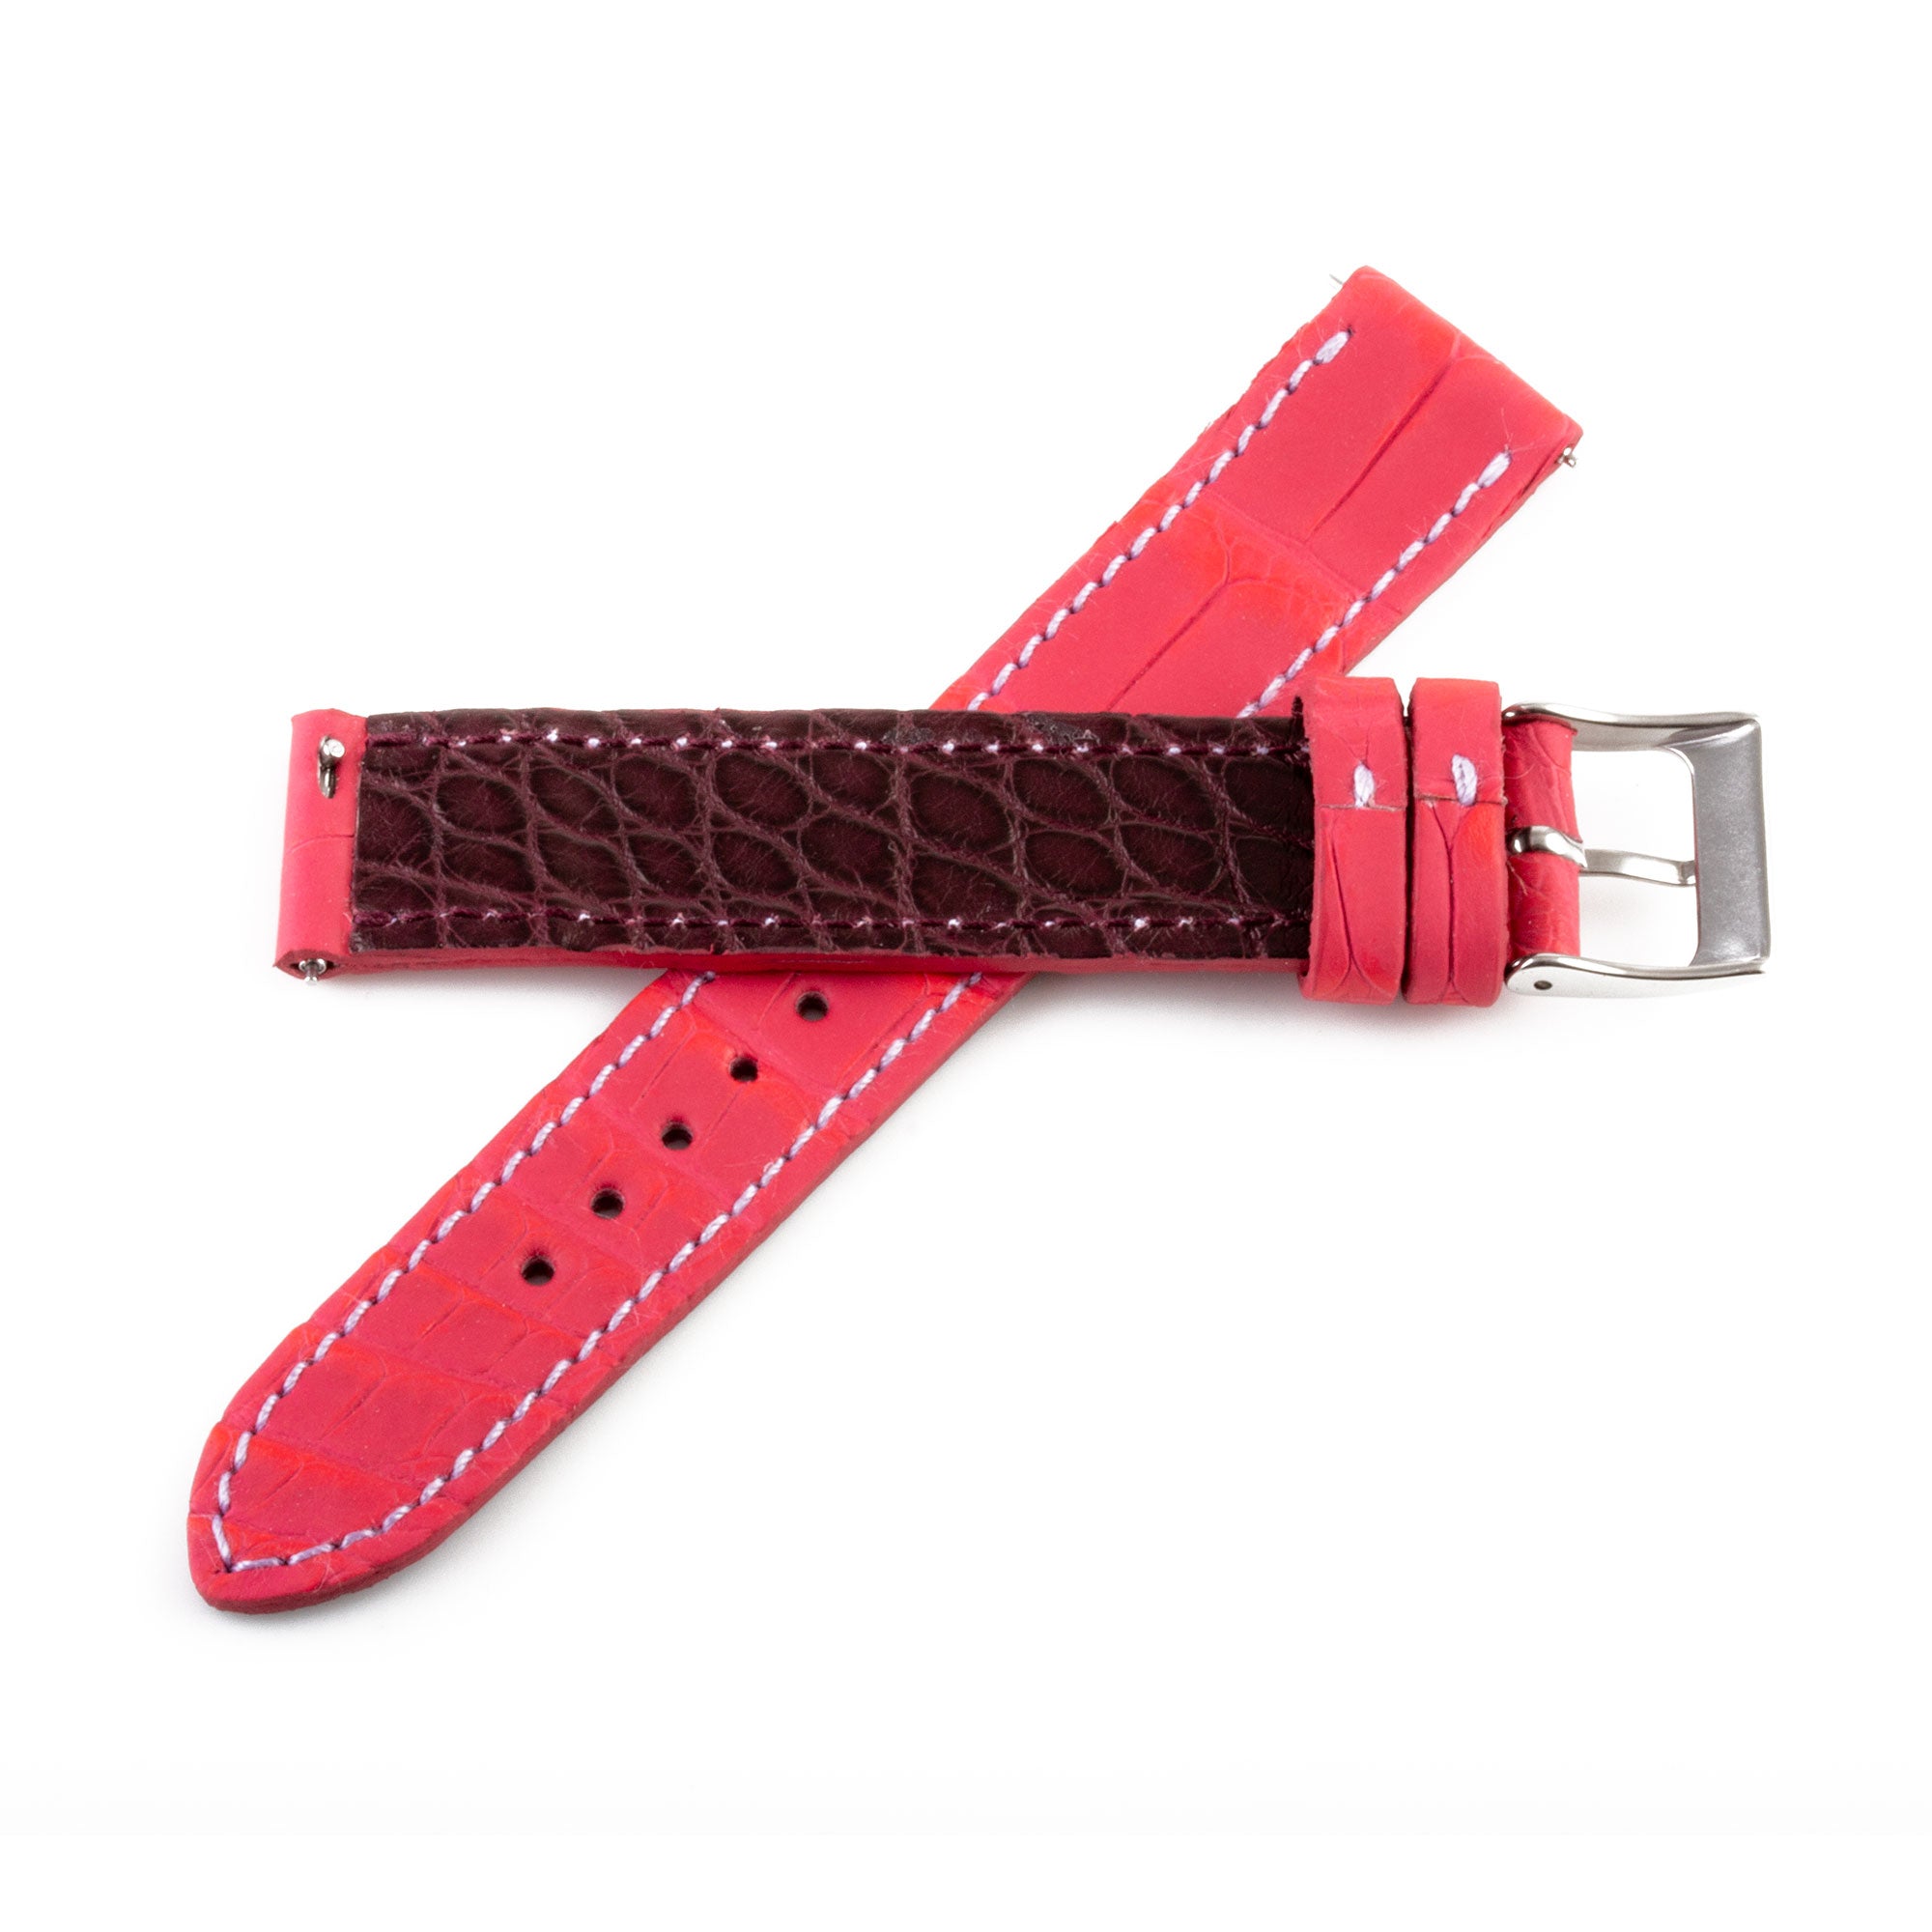 Alligator "Solo" leather watch band - 17mm width (0.67 inches) / Size M (n° 4)